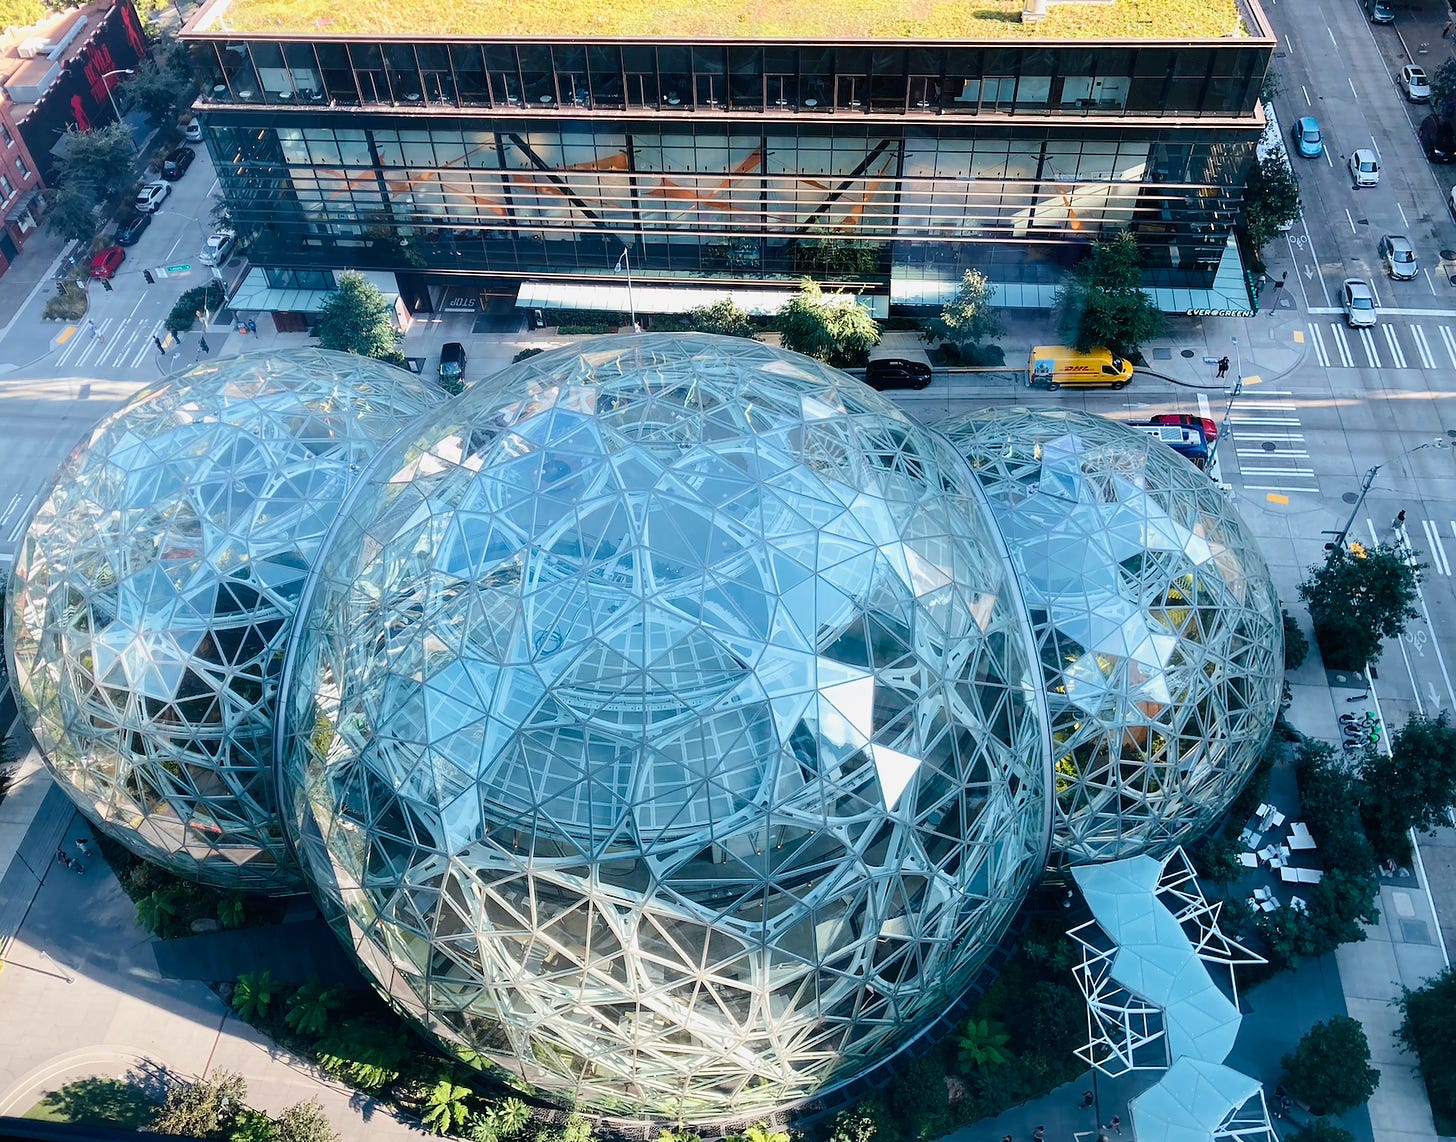 Looking down from 16th floor at the Bezos Balls, 3 glass spheres filled with botanical gardens inside